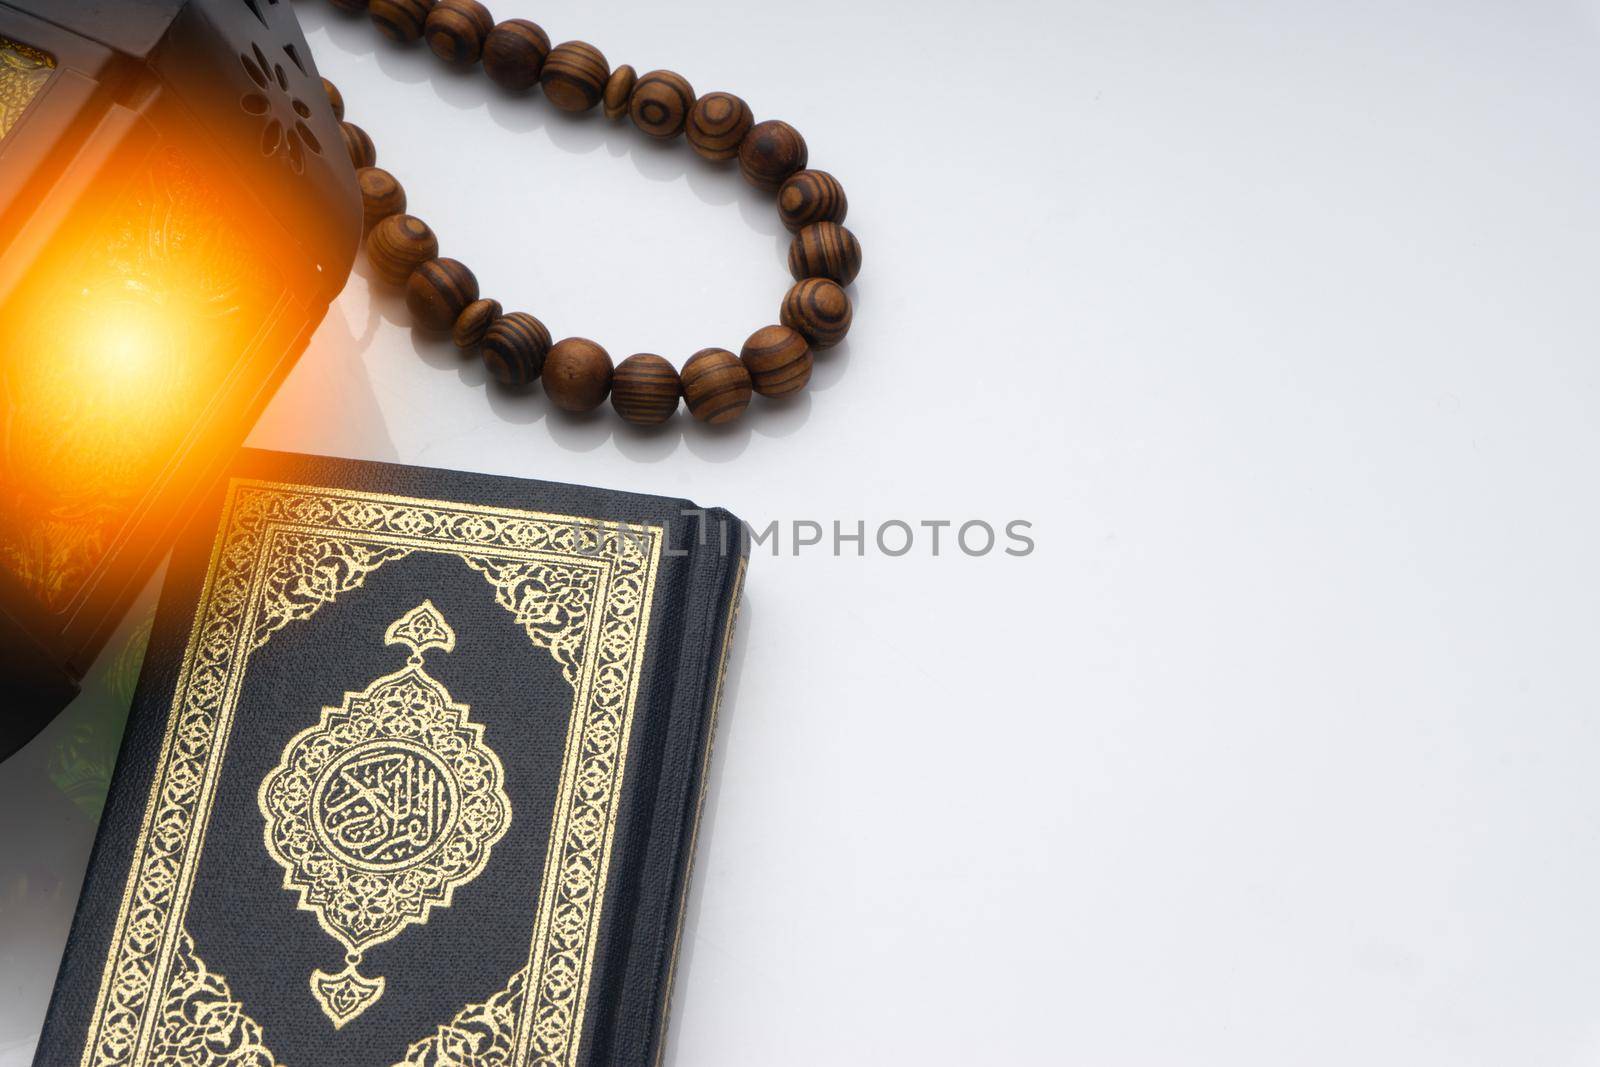 Holy Al Quran with written arabic calligraphy meaning of Al Quran, lantern and rosary beads or tasbih on white background by silverwings